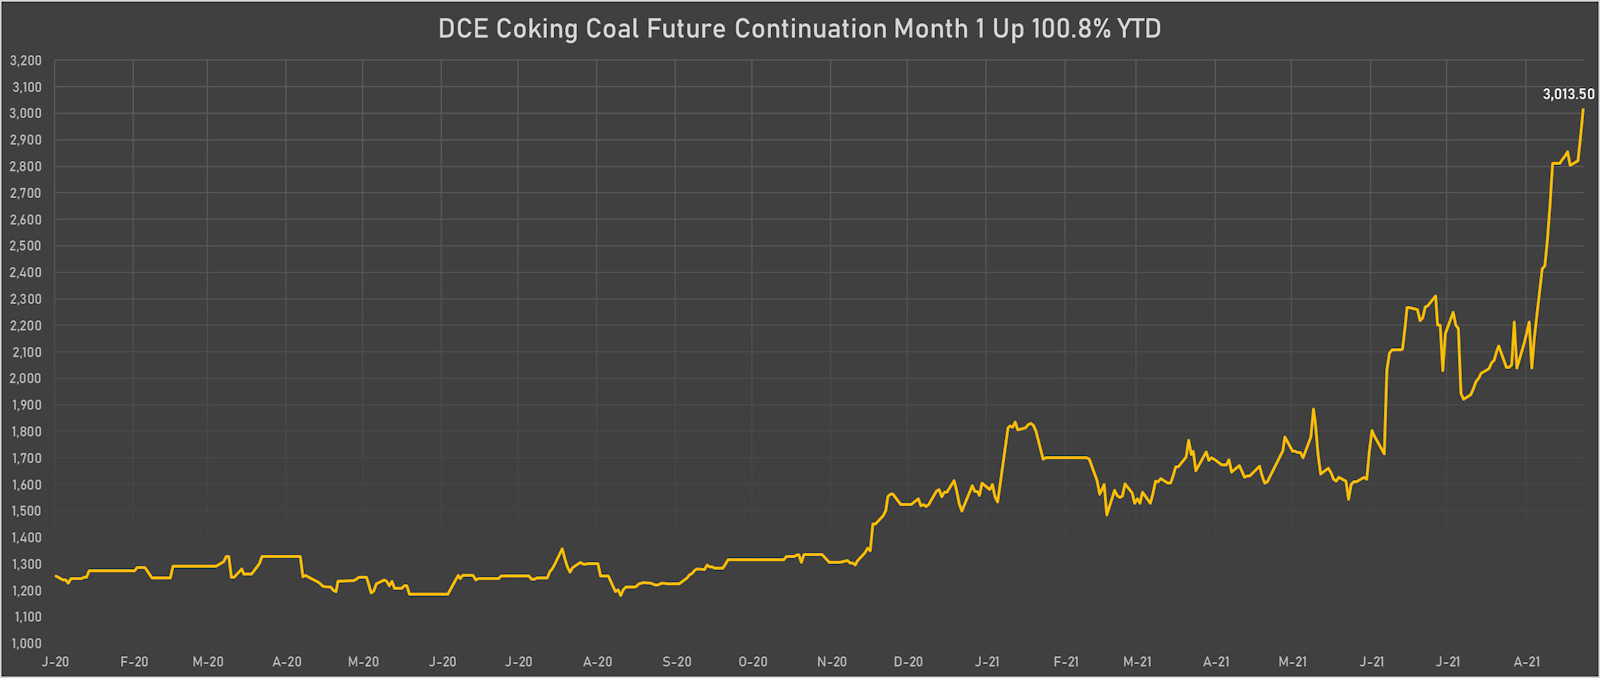 Coking Coal Has Now Doubled This Year | Sources: ϕpost, Refinitiv data